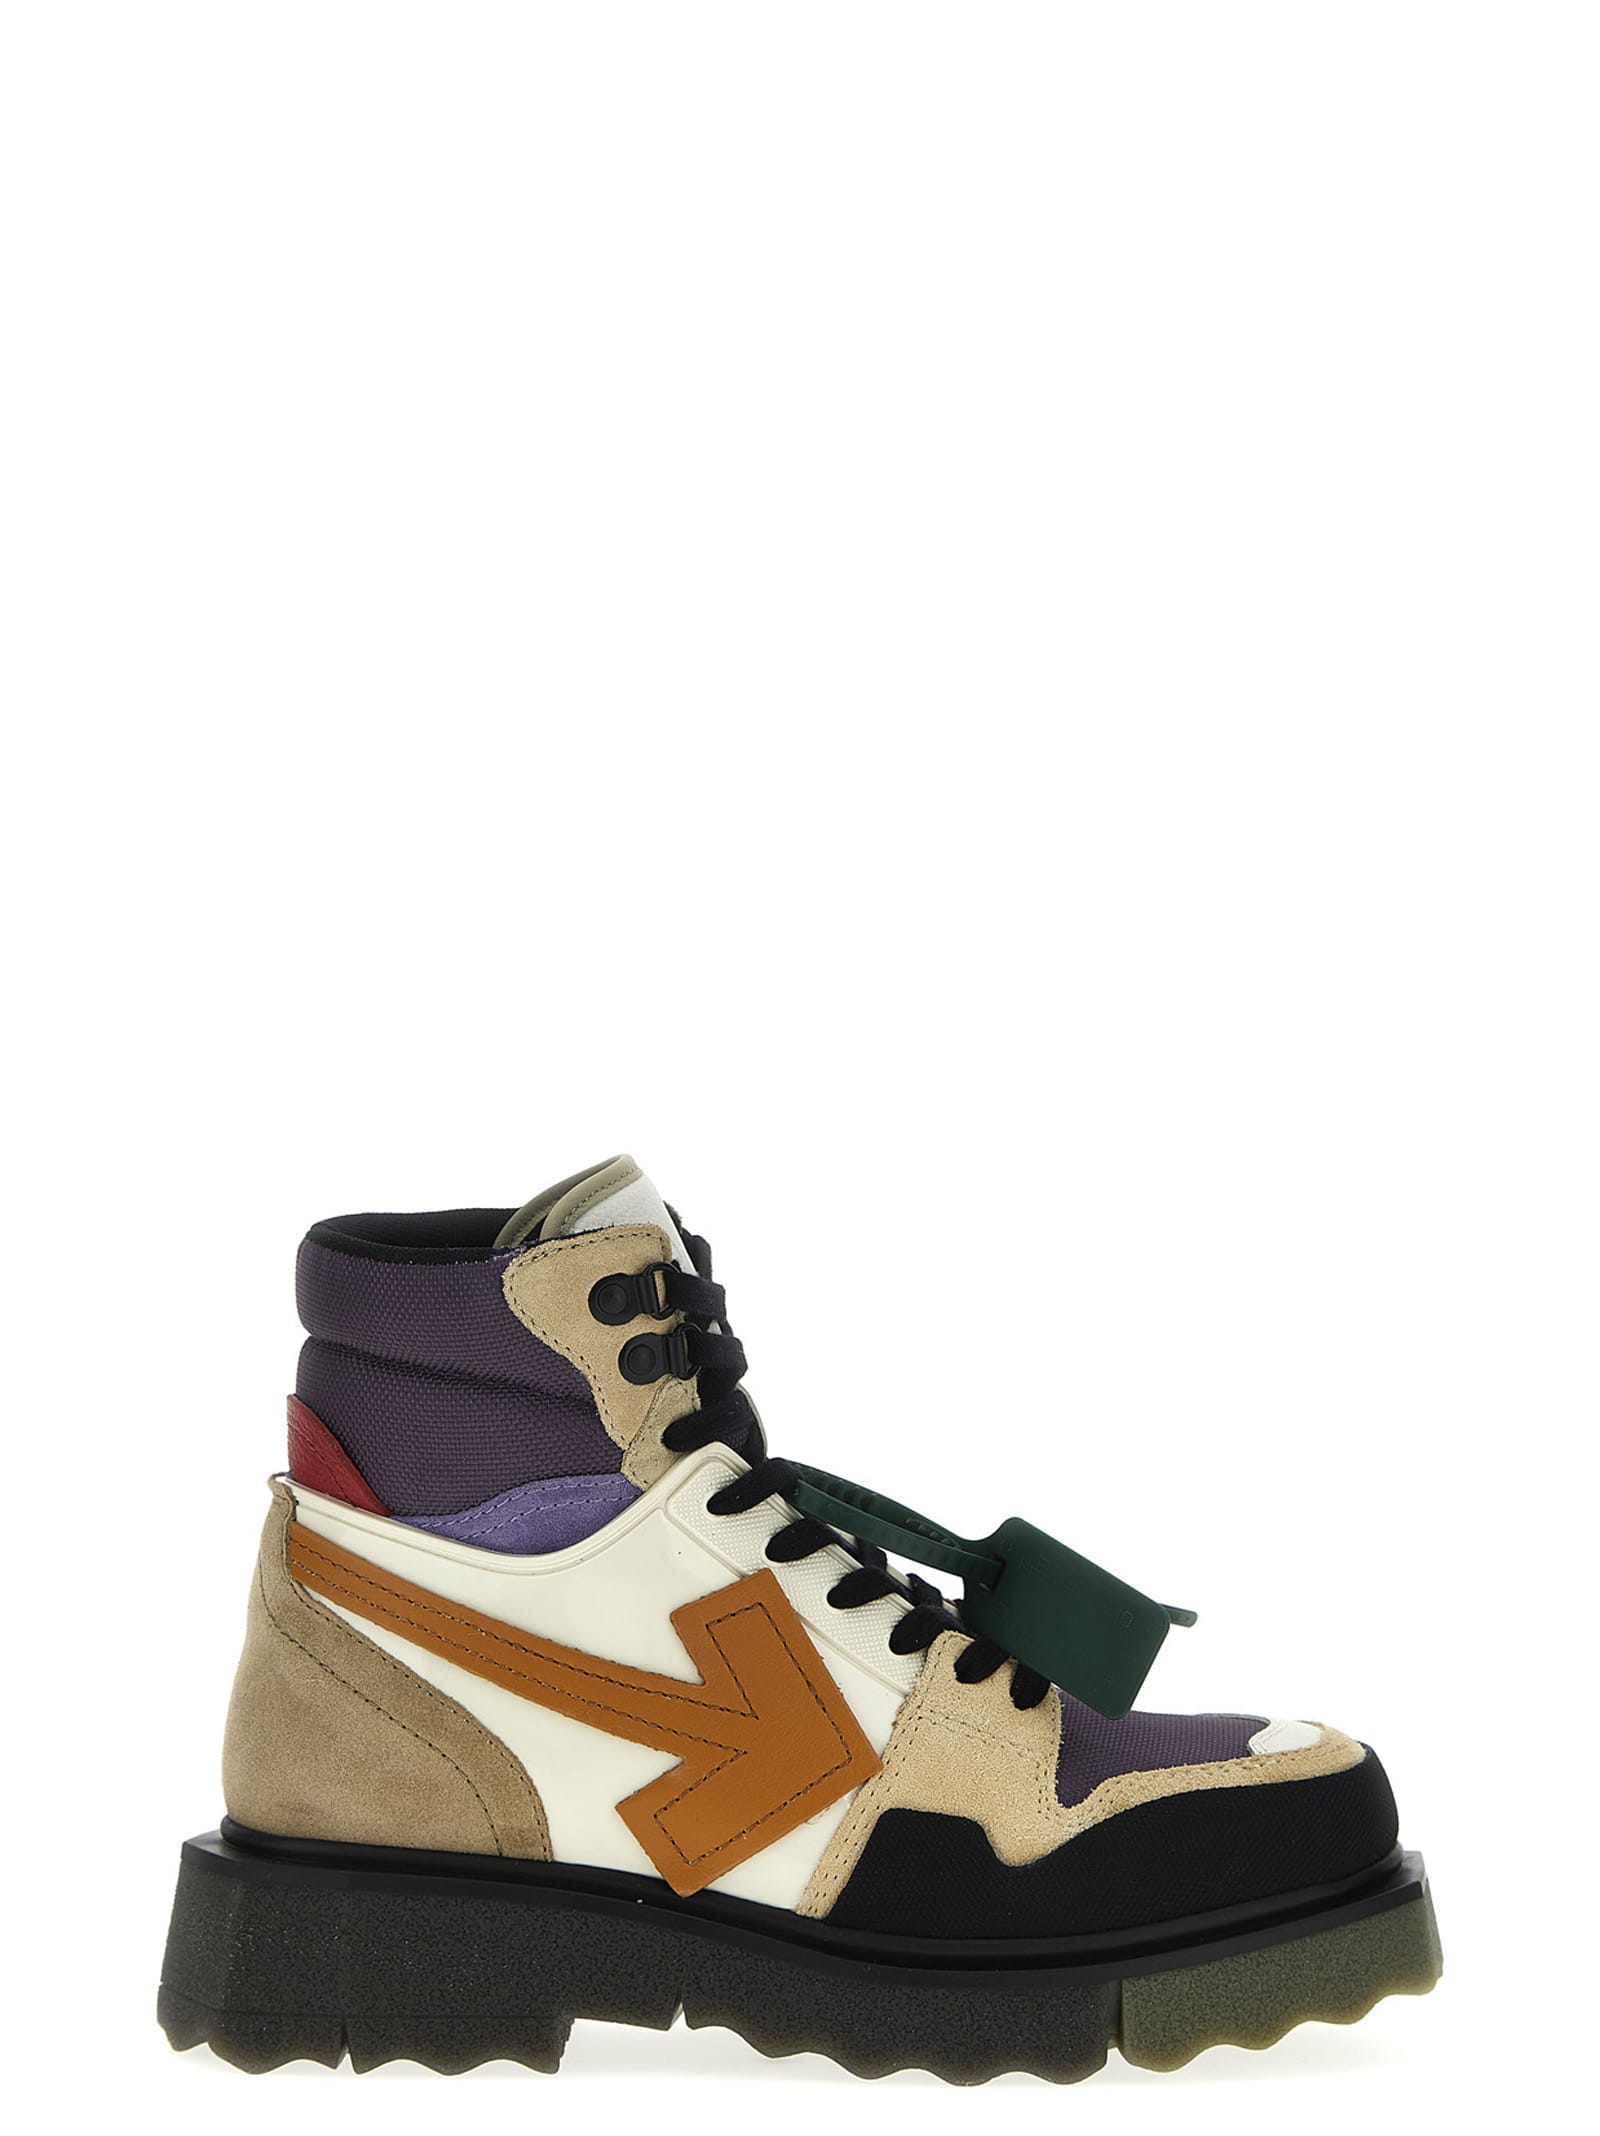 Off-white Hiking Sponge Sneakerboot Lacing Boots In Sand/purple